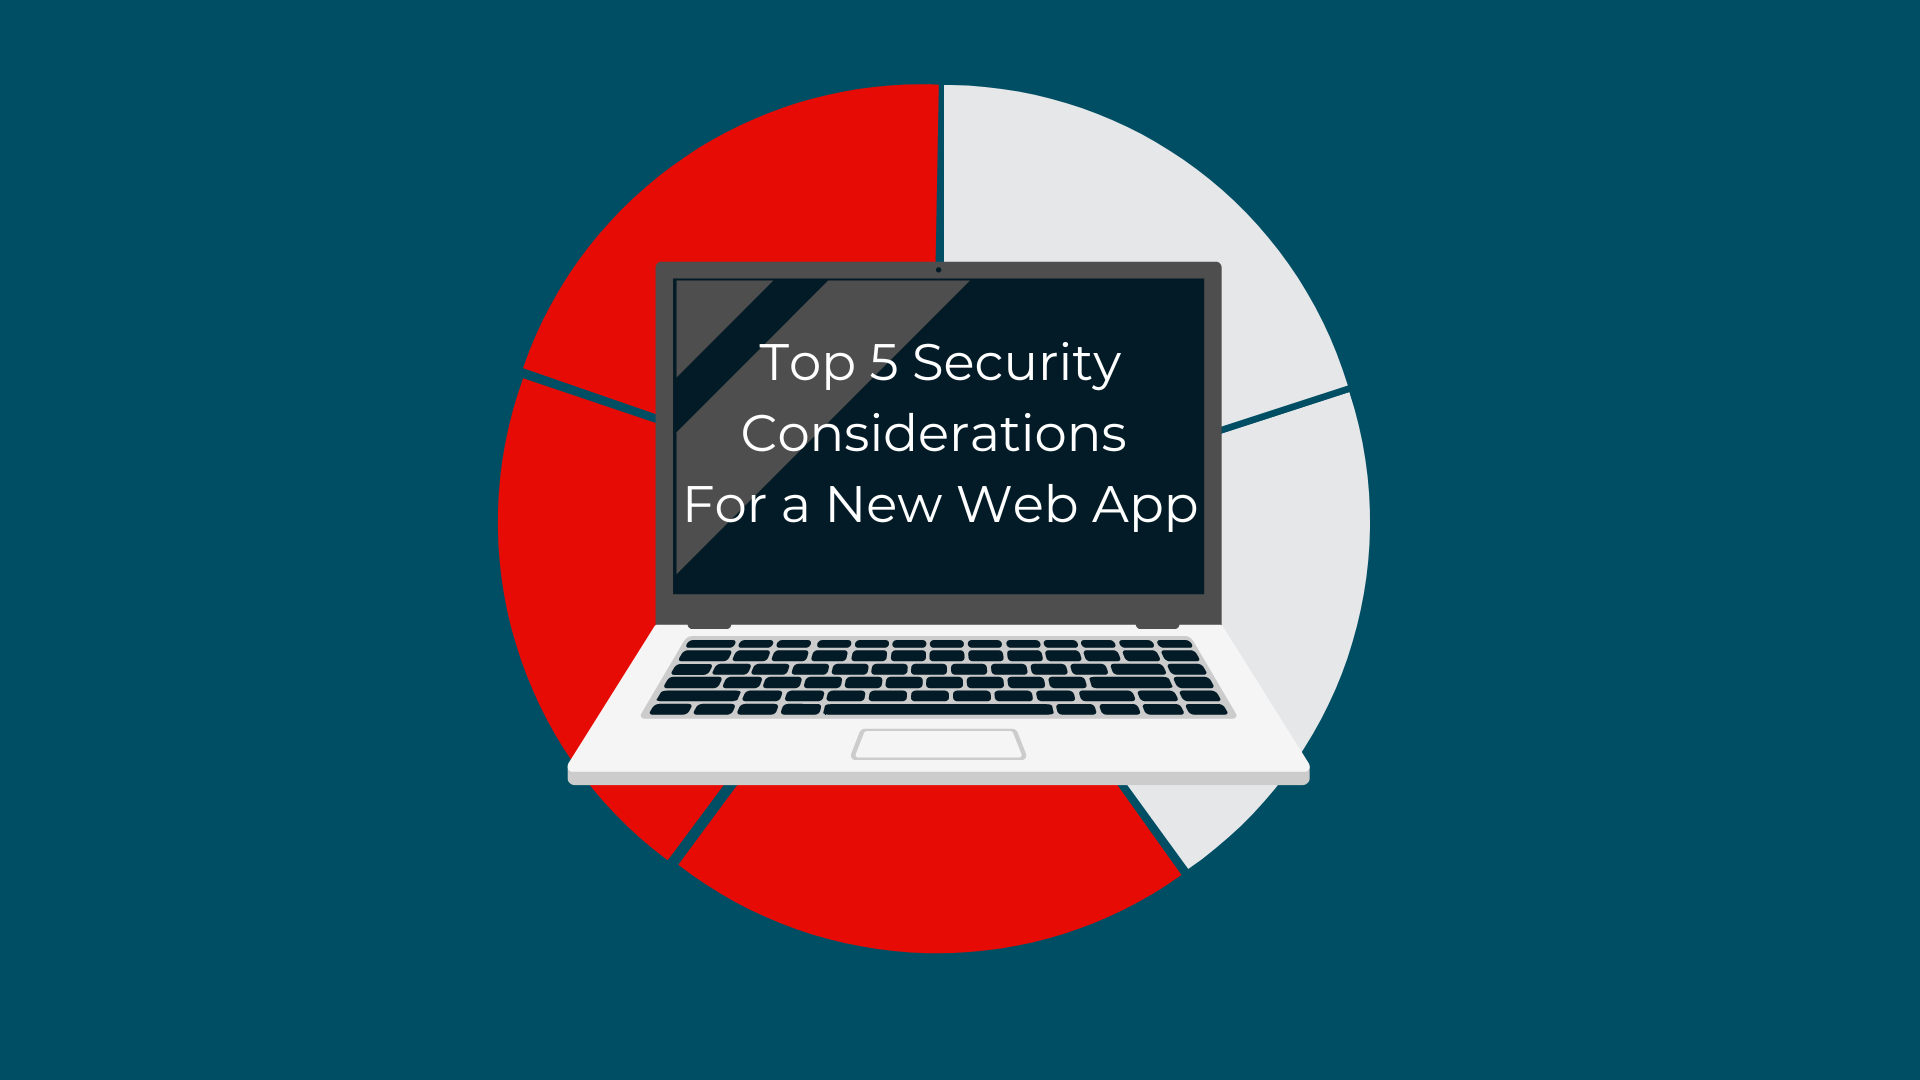 Top 5 Security Considerations: 2. Authentication & Authorization